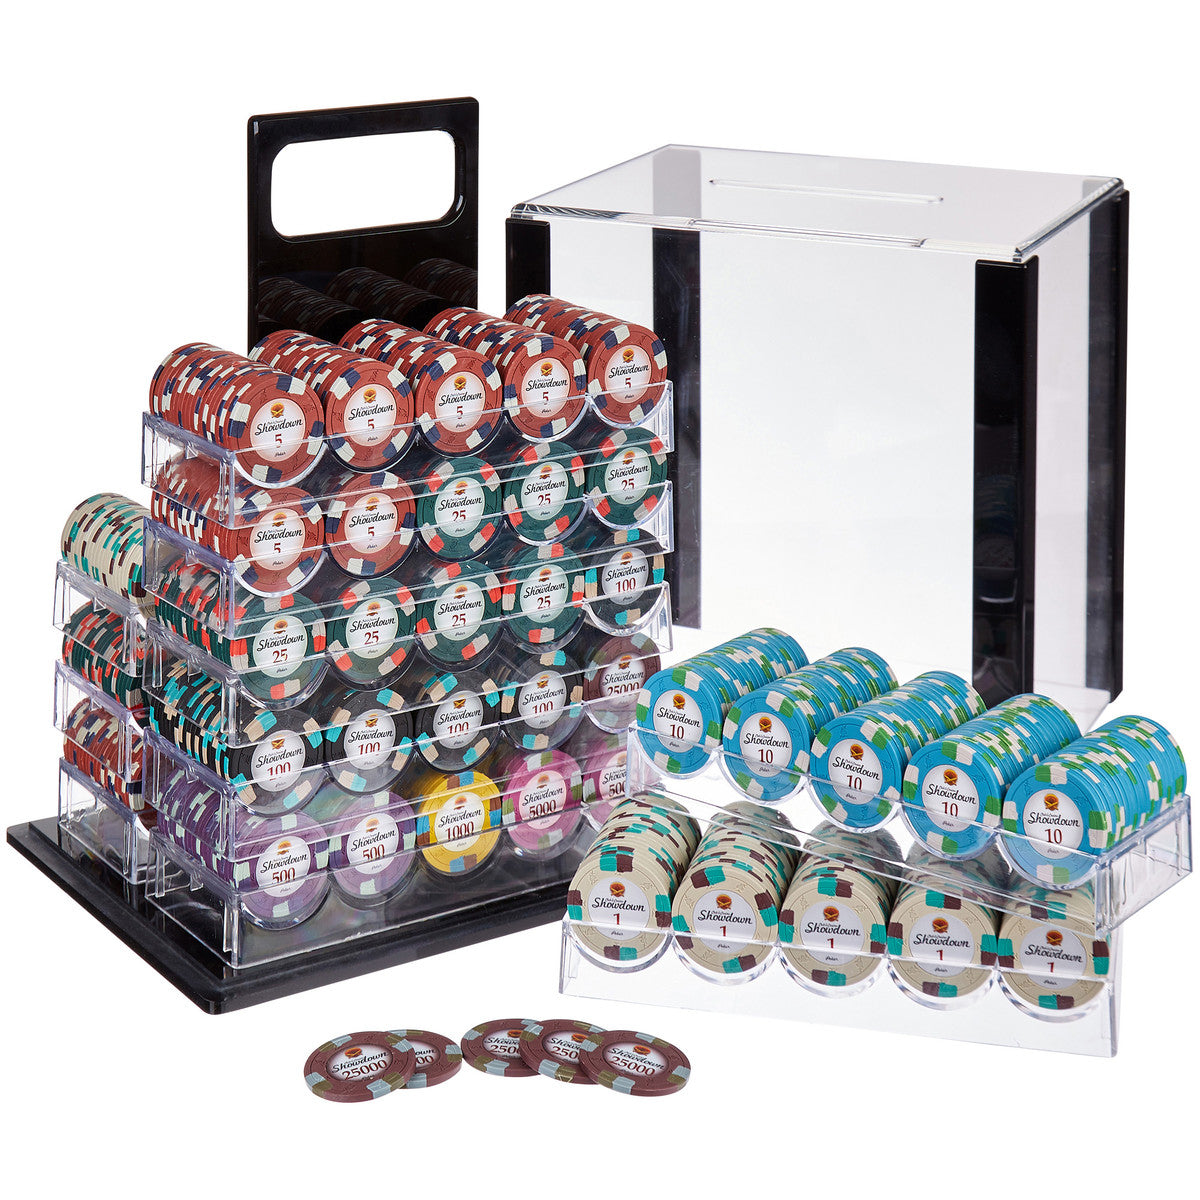 1000 Showdown Poker Chips with Acrylic Carrier